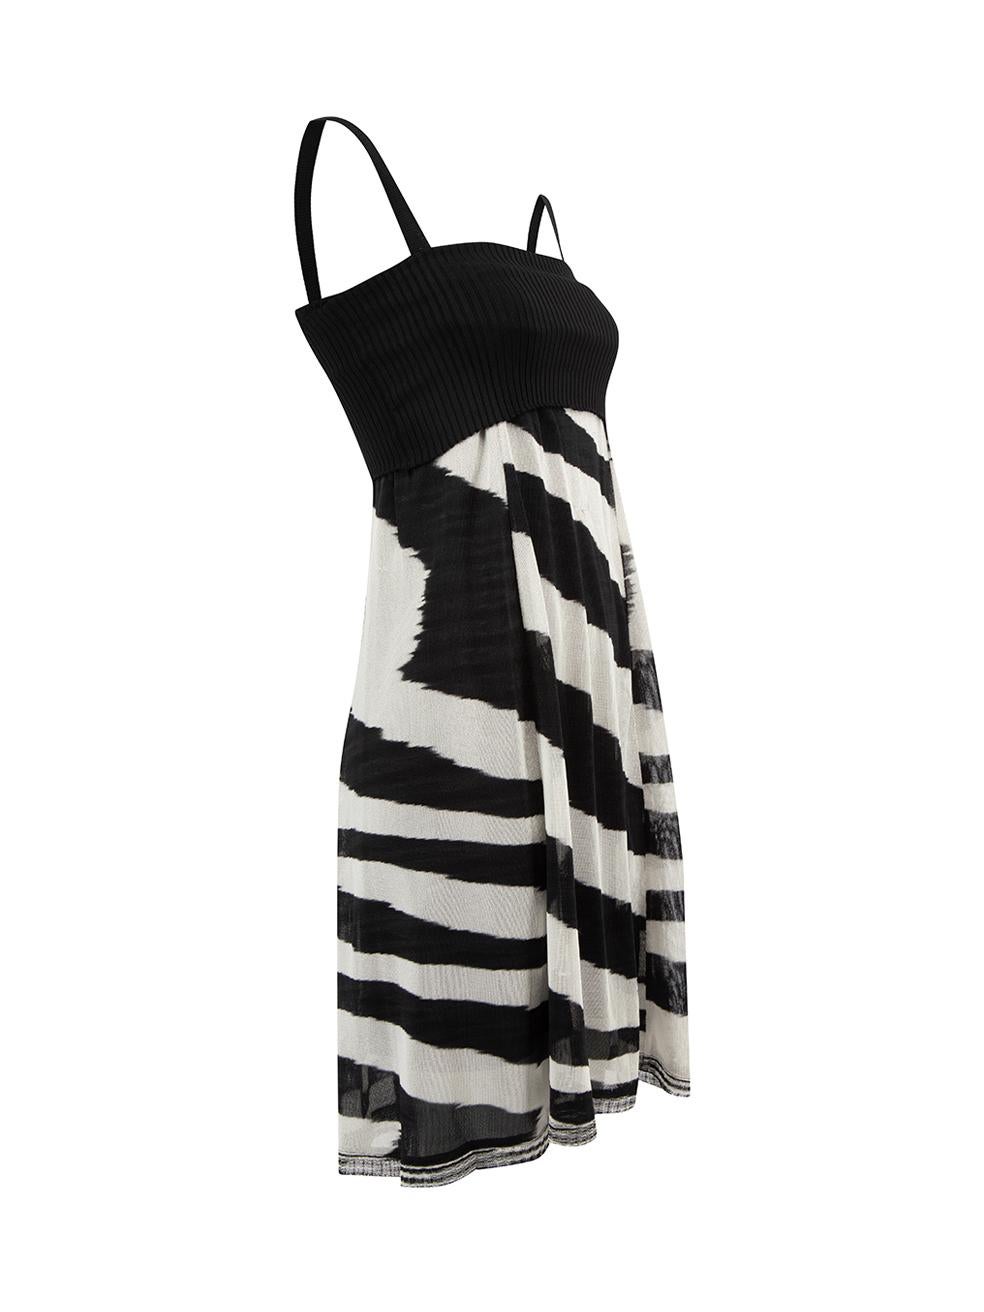 CONDITION is Very good. Hardly any visible wear to dress is evident. Few loose threads seen on this used Missoni designer resale item. 
 
 Details
  Black and white
 Synthetic
 Mini dress
 Knit top
 Zebra print skirt
 
 
 Made in Italy
 
